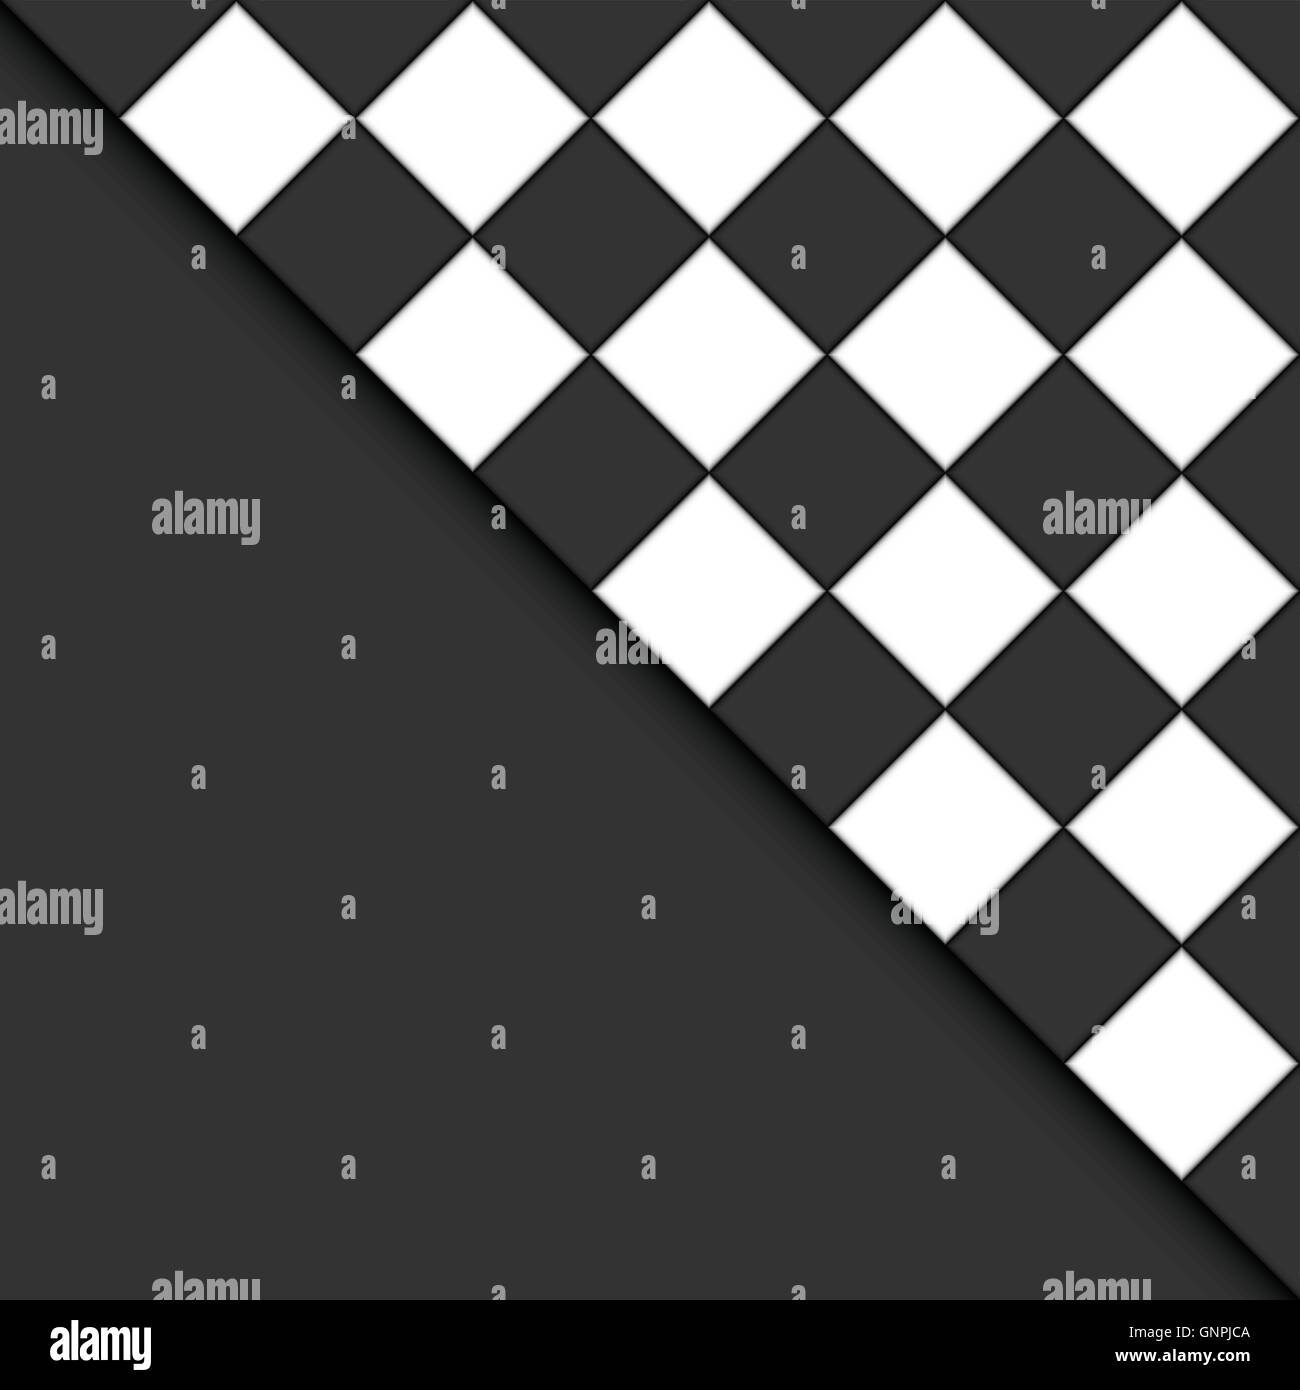 Black And White Leather Texture Background Checker Chess Seamless Pattern  Square Leather Abstract Background Stock Photo - Download Image Now - iStock